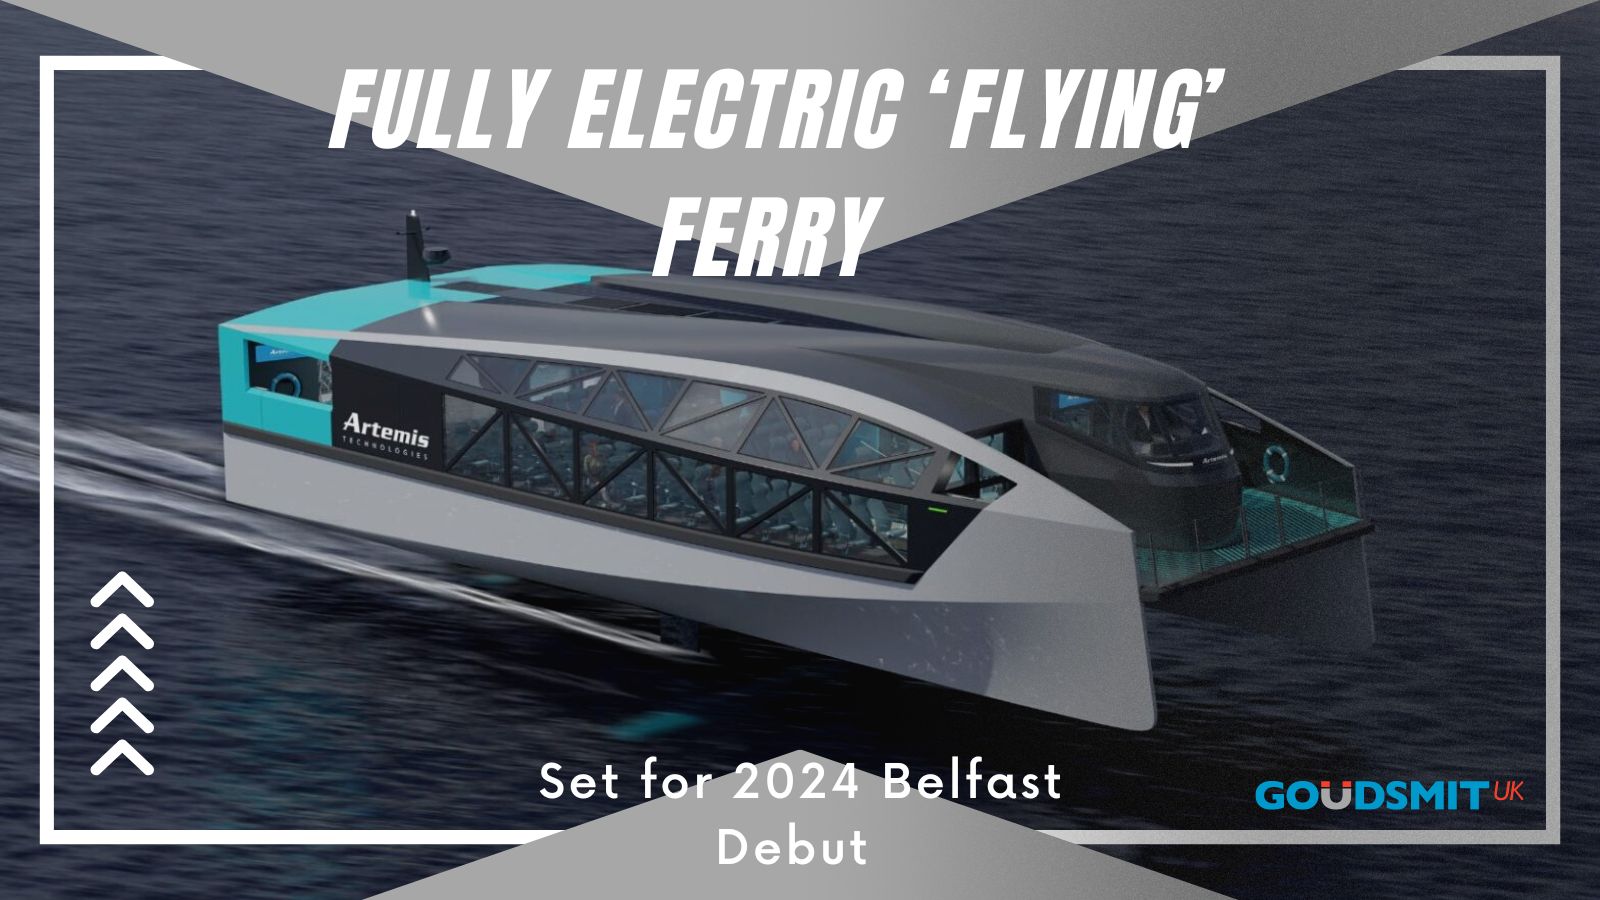 Fully electric flying ferry